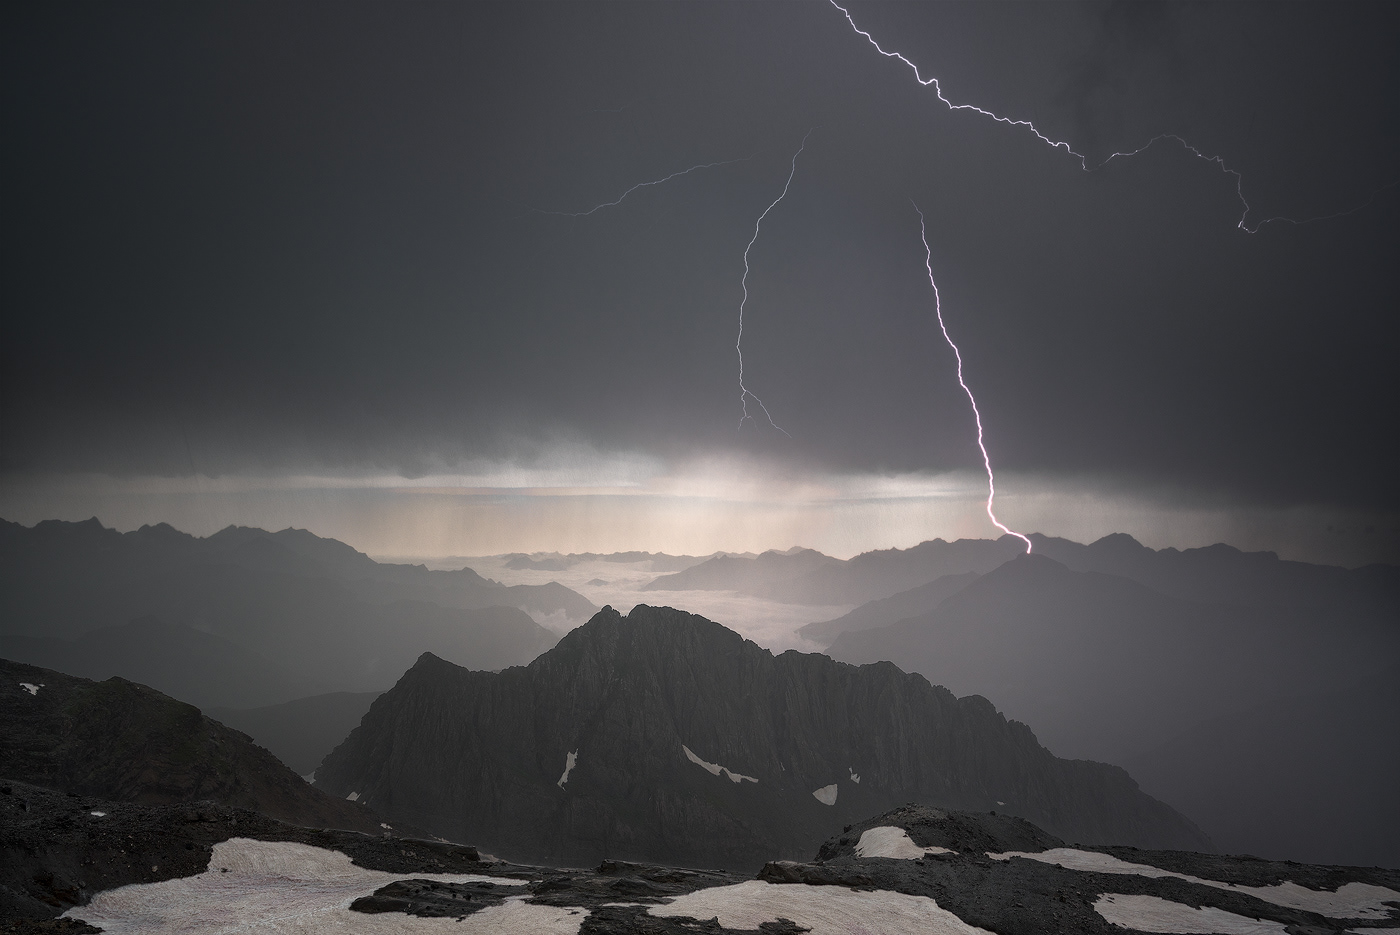 clouds forgotten Landscape mountains pyrenees SKY thunderstorm wild wilderness atmosphere